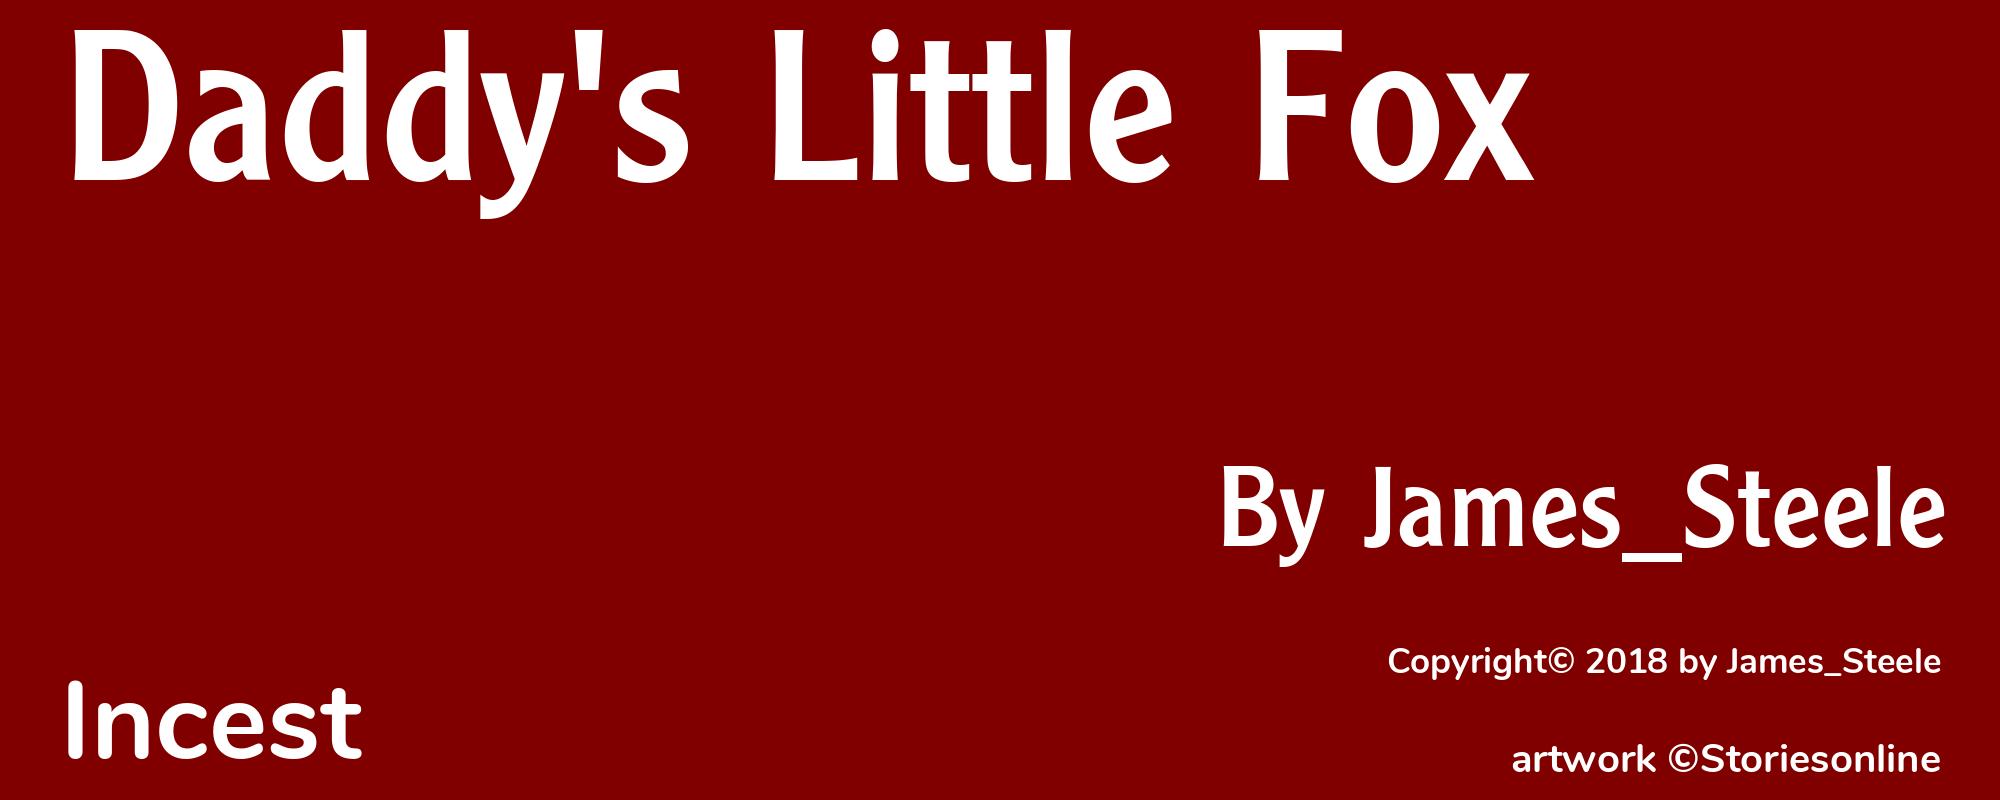 Daddy's Little Fox - Cover